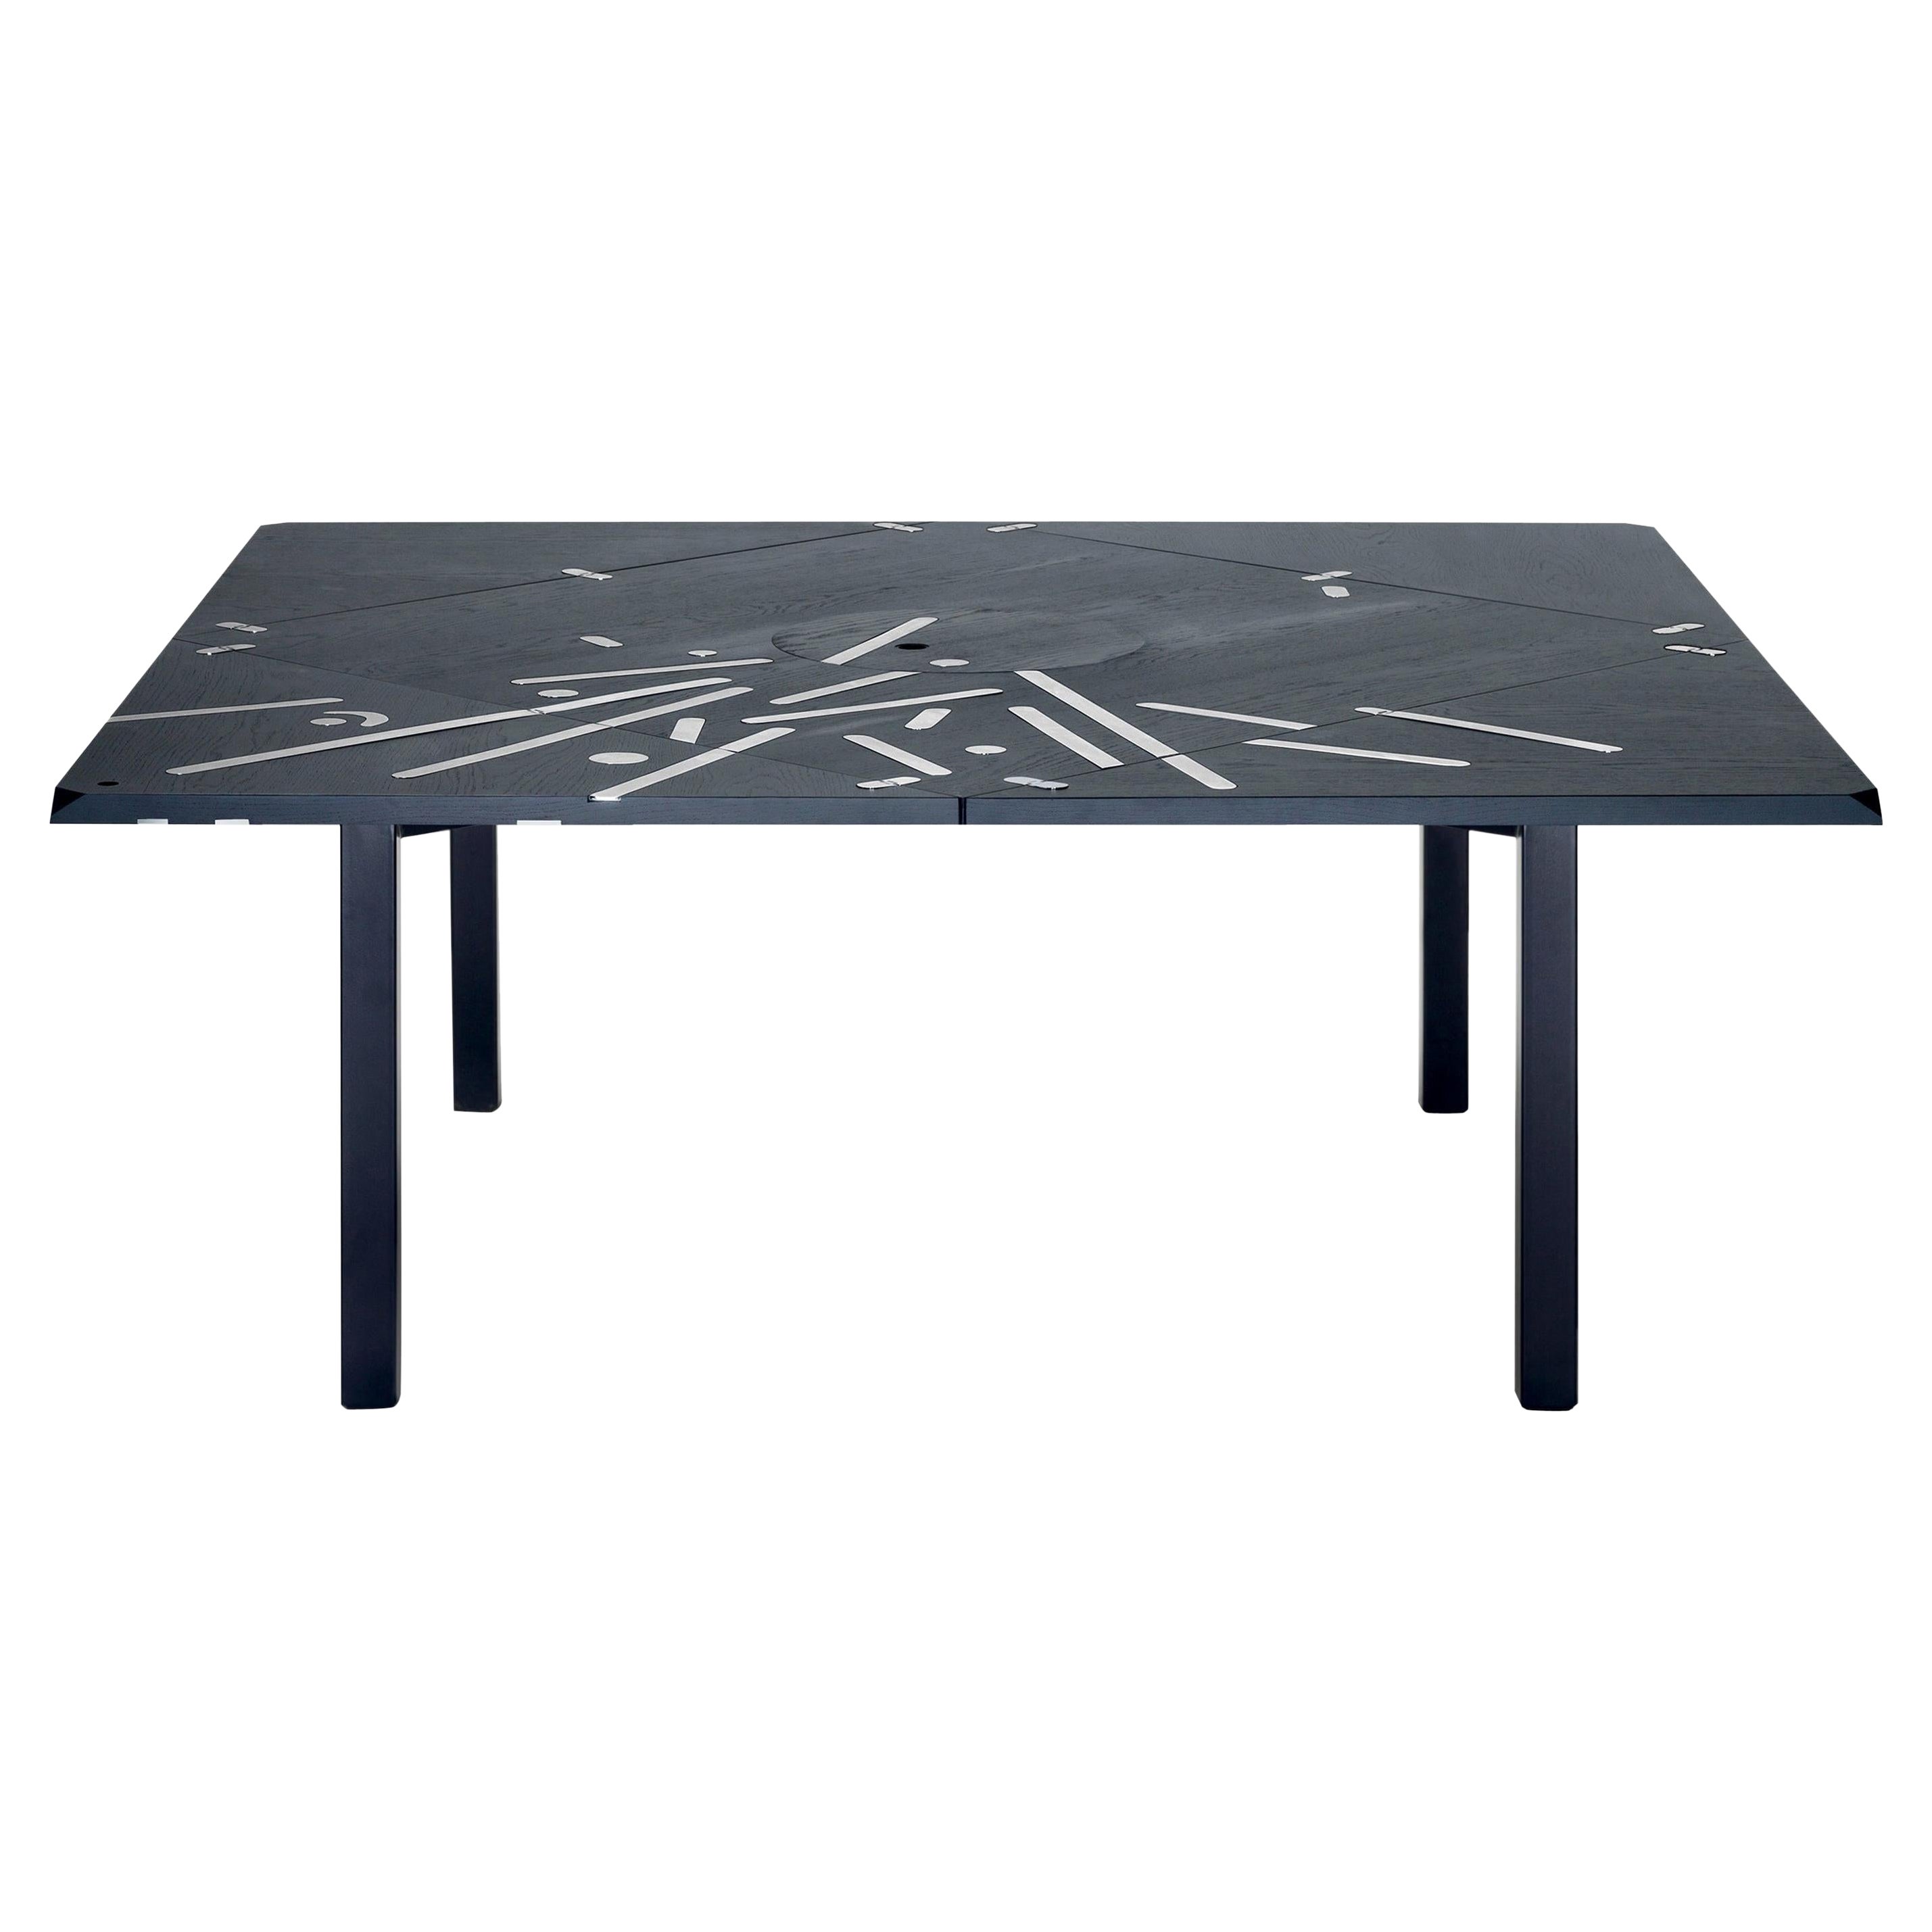 Limited Edition Alella Table by Lluís Clotet for BD For Sale